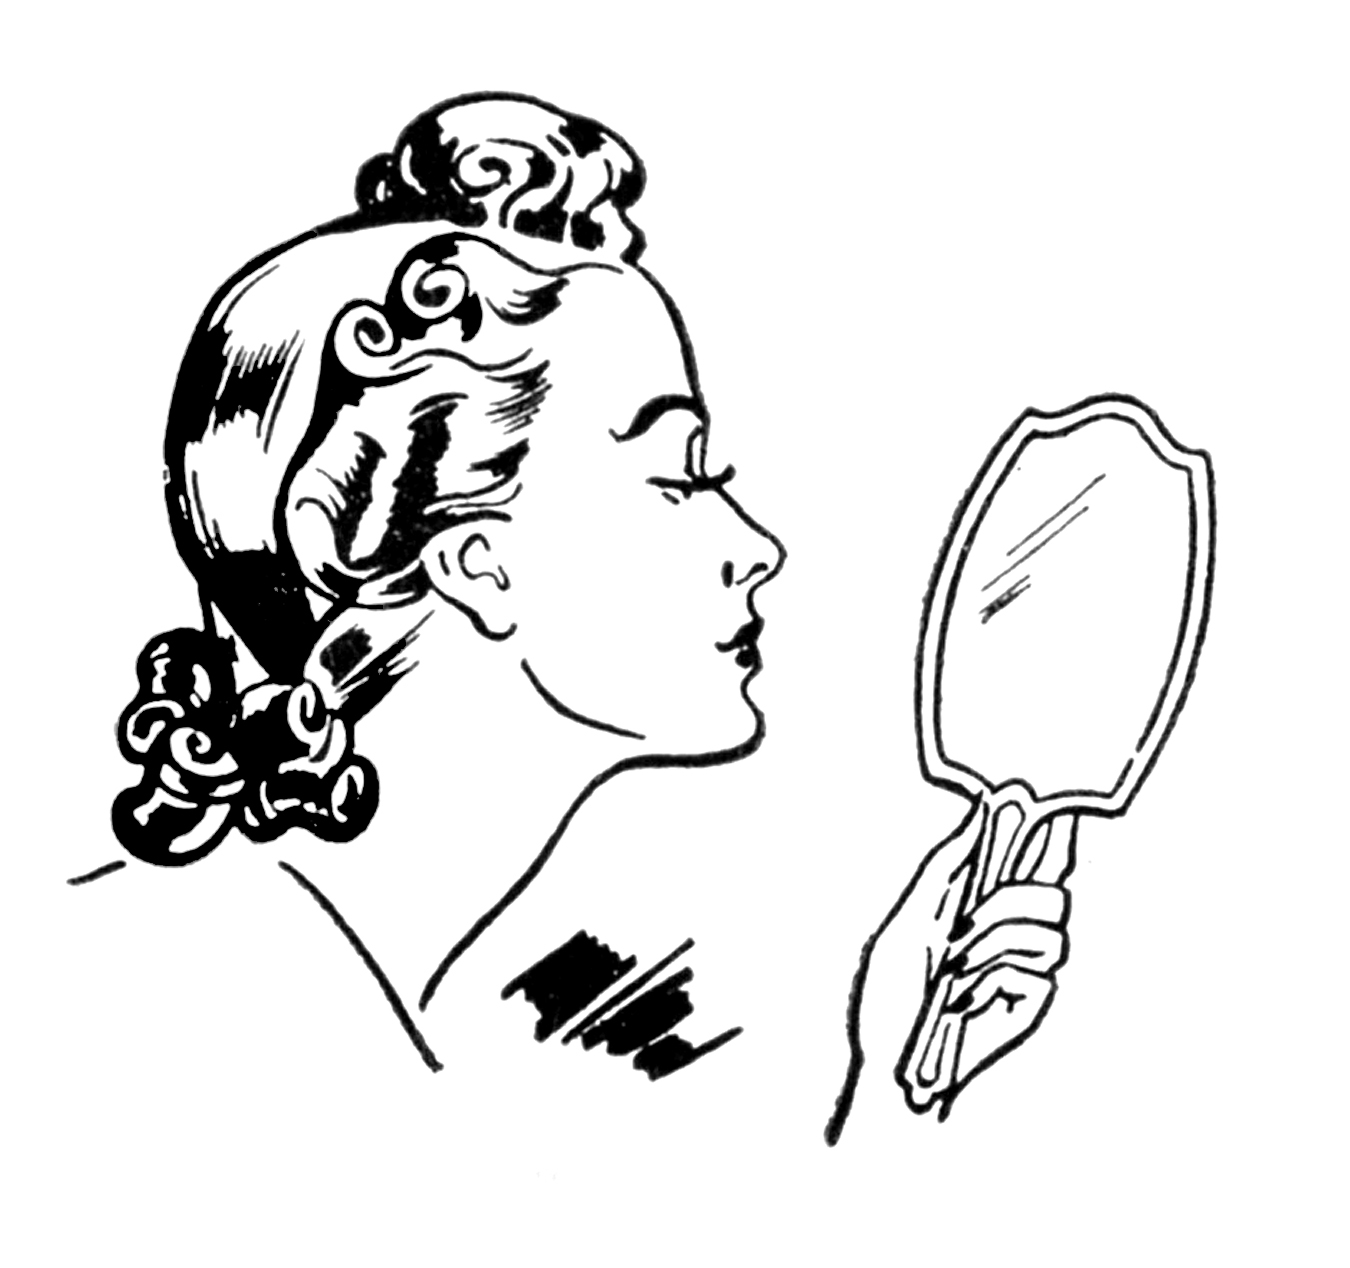 Free Cosmetology Clipart Great Free Clipart, Silhouette - Cosmetology Drawi...